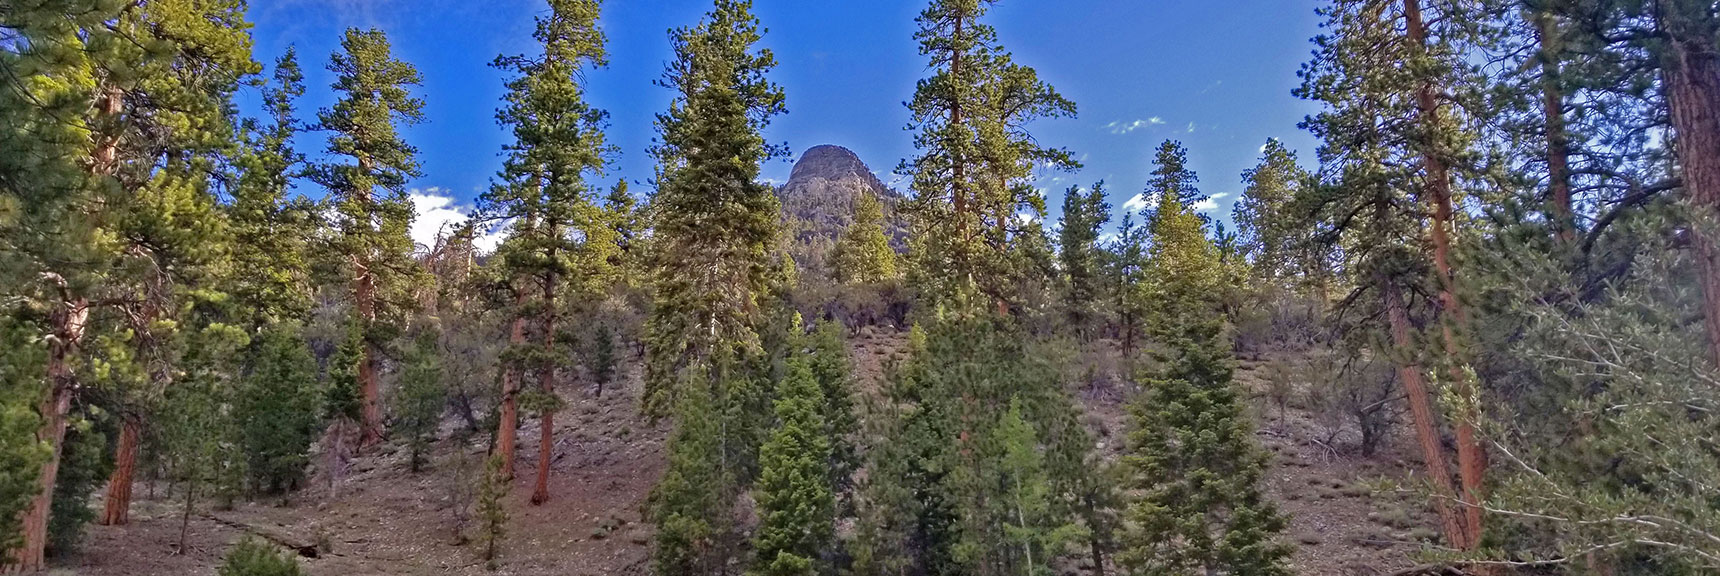 The Sisters South Peak Viewed From the Trail Through the Trees.| The Sisters South | Lee Canyon | Mt Charleston Wilderness | Spring Mountains, Nevada